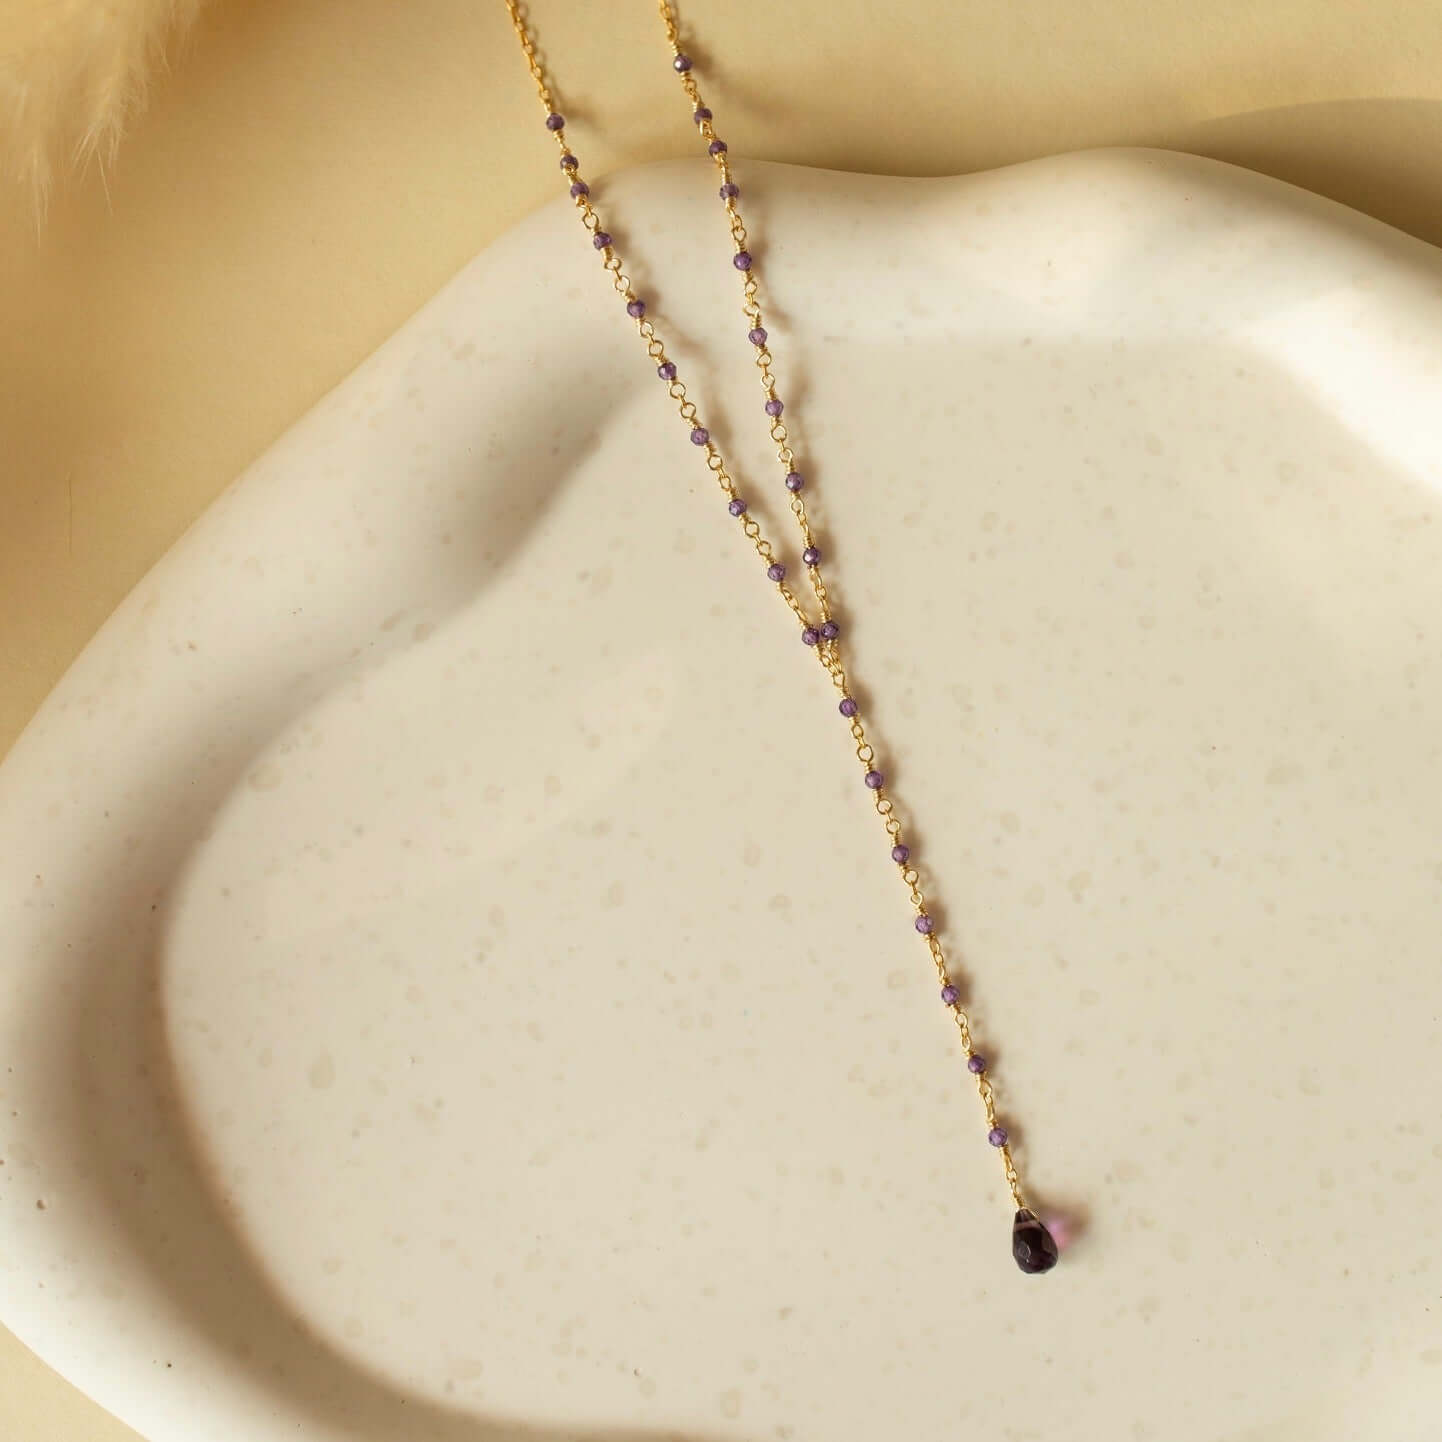 Amethyst necklace on clay—a simple, beautiful adornment.